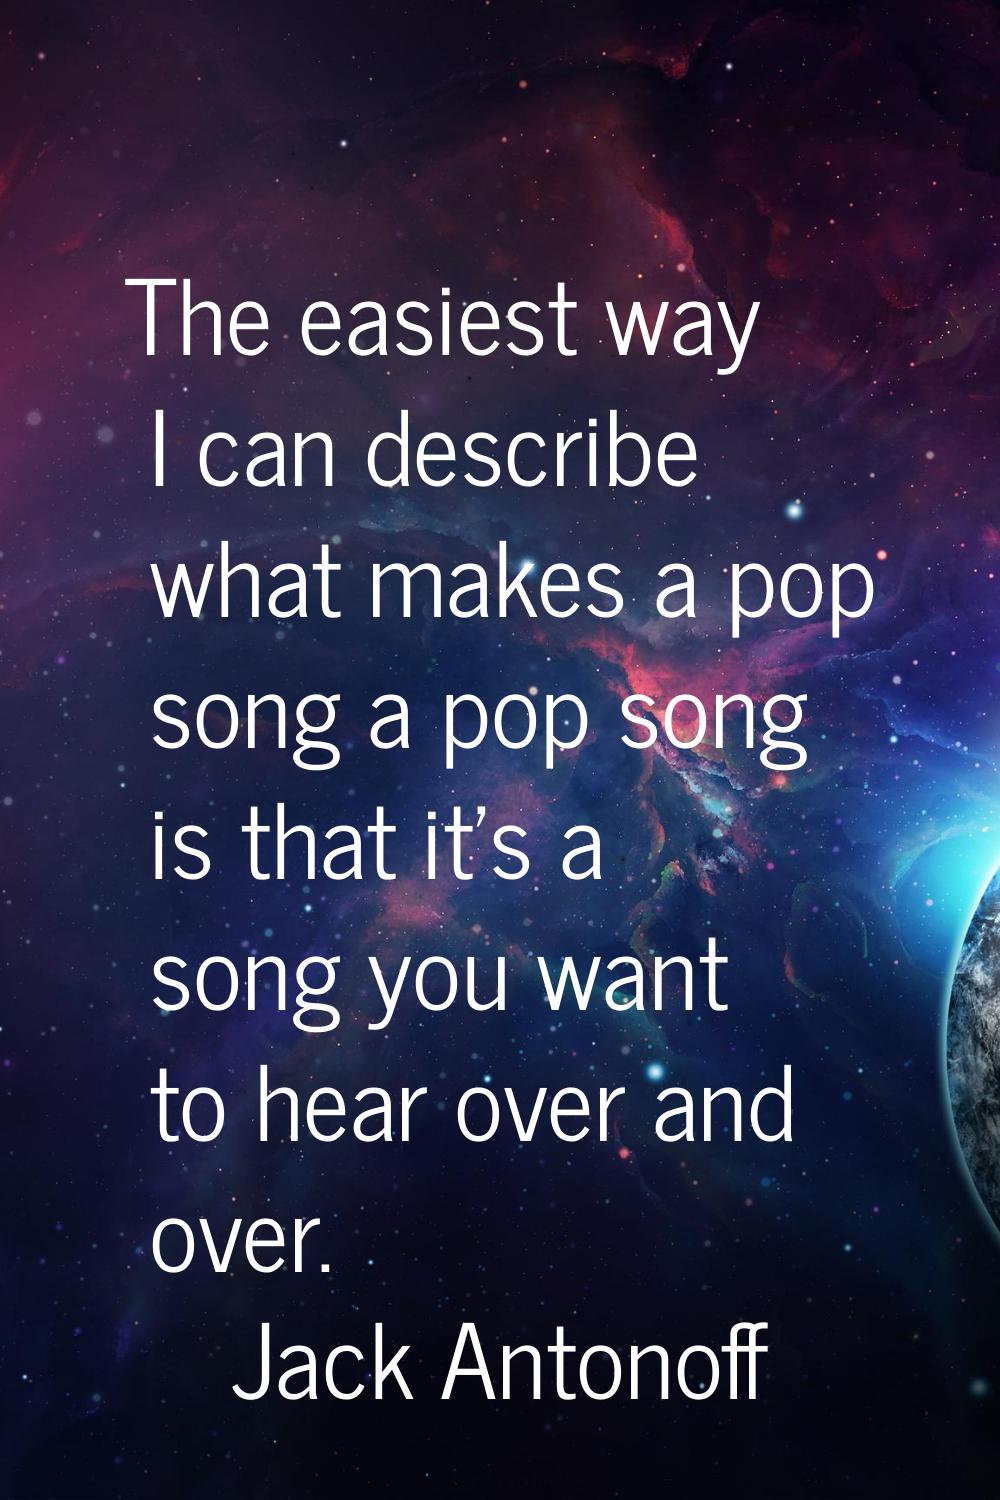 The easiest way I can describe what makes a pop song a pop song is that it's a song you want to hea